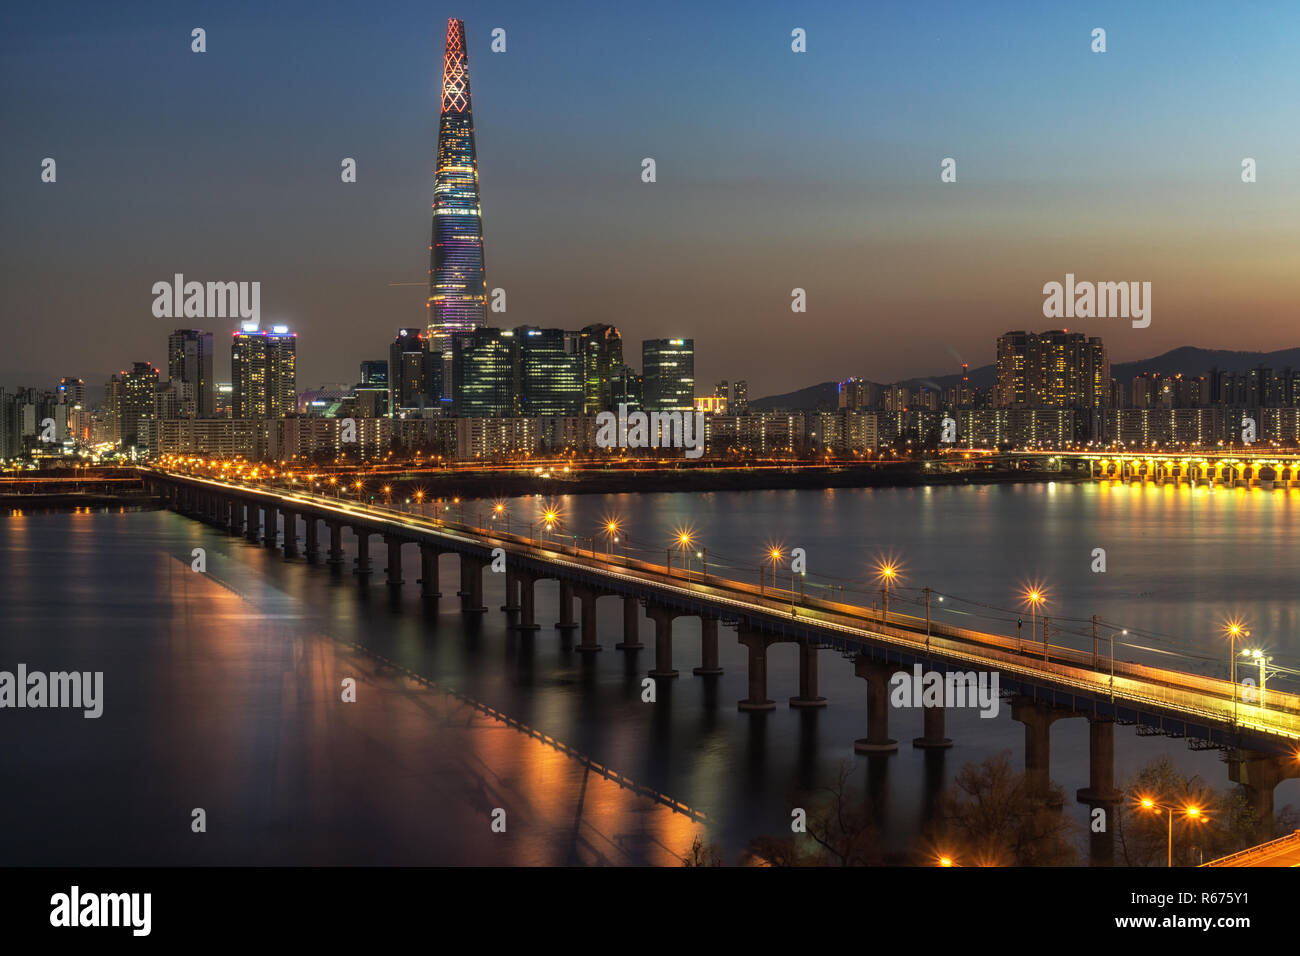 Lotte tower at night Banque D'Images